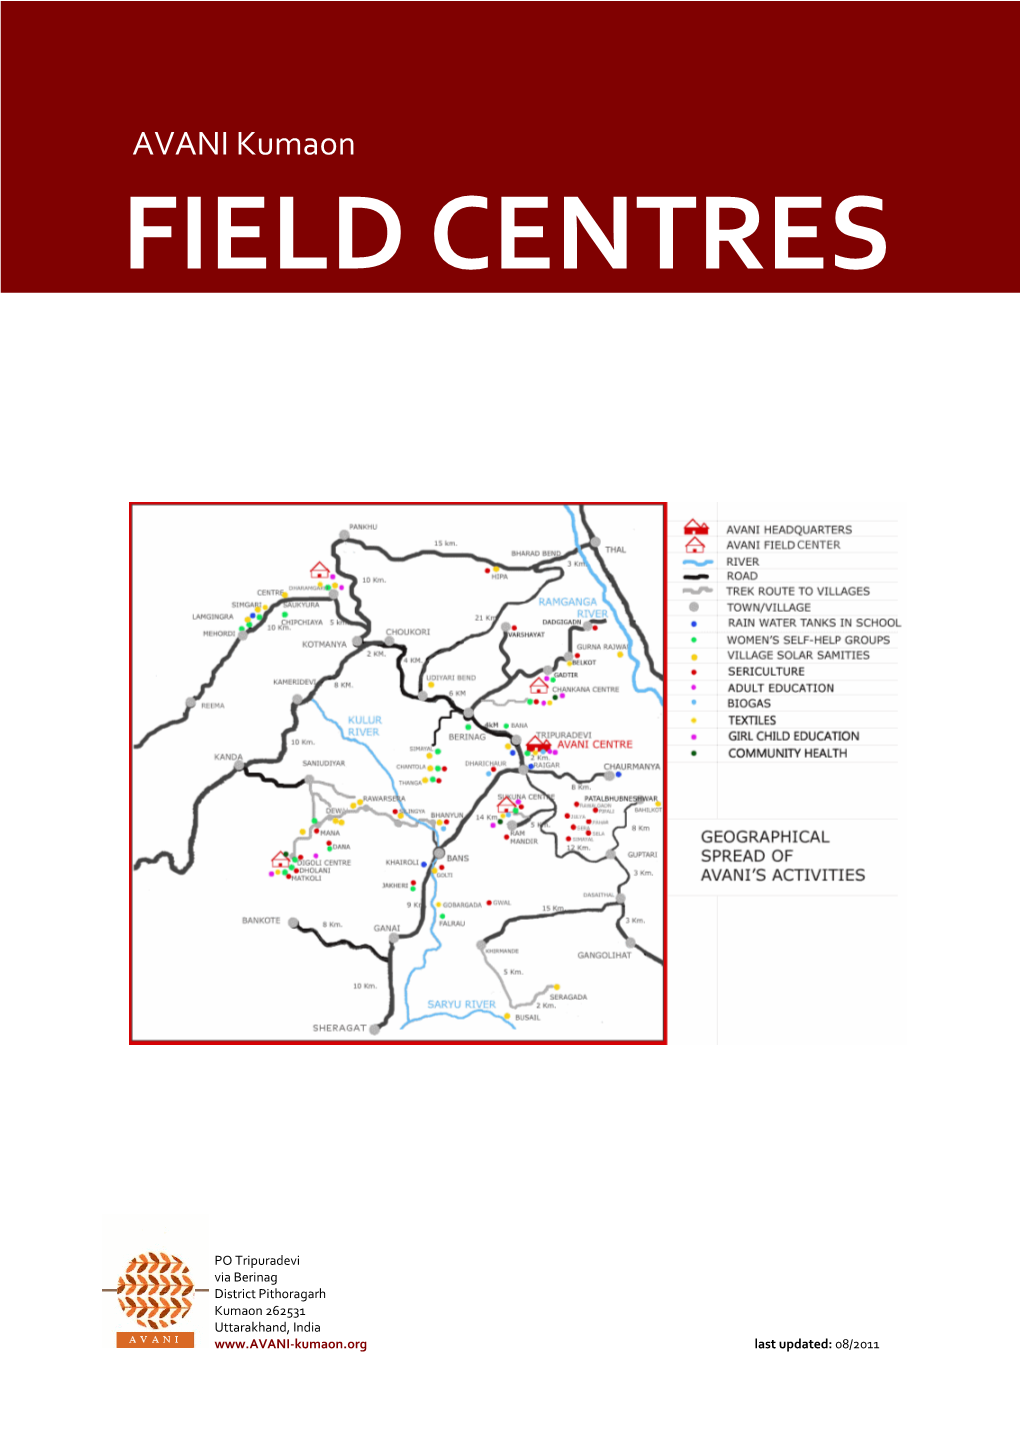 Field Centres